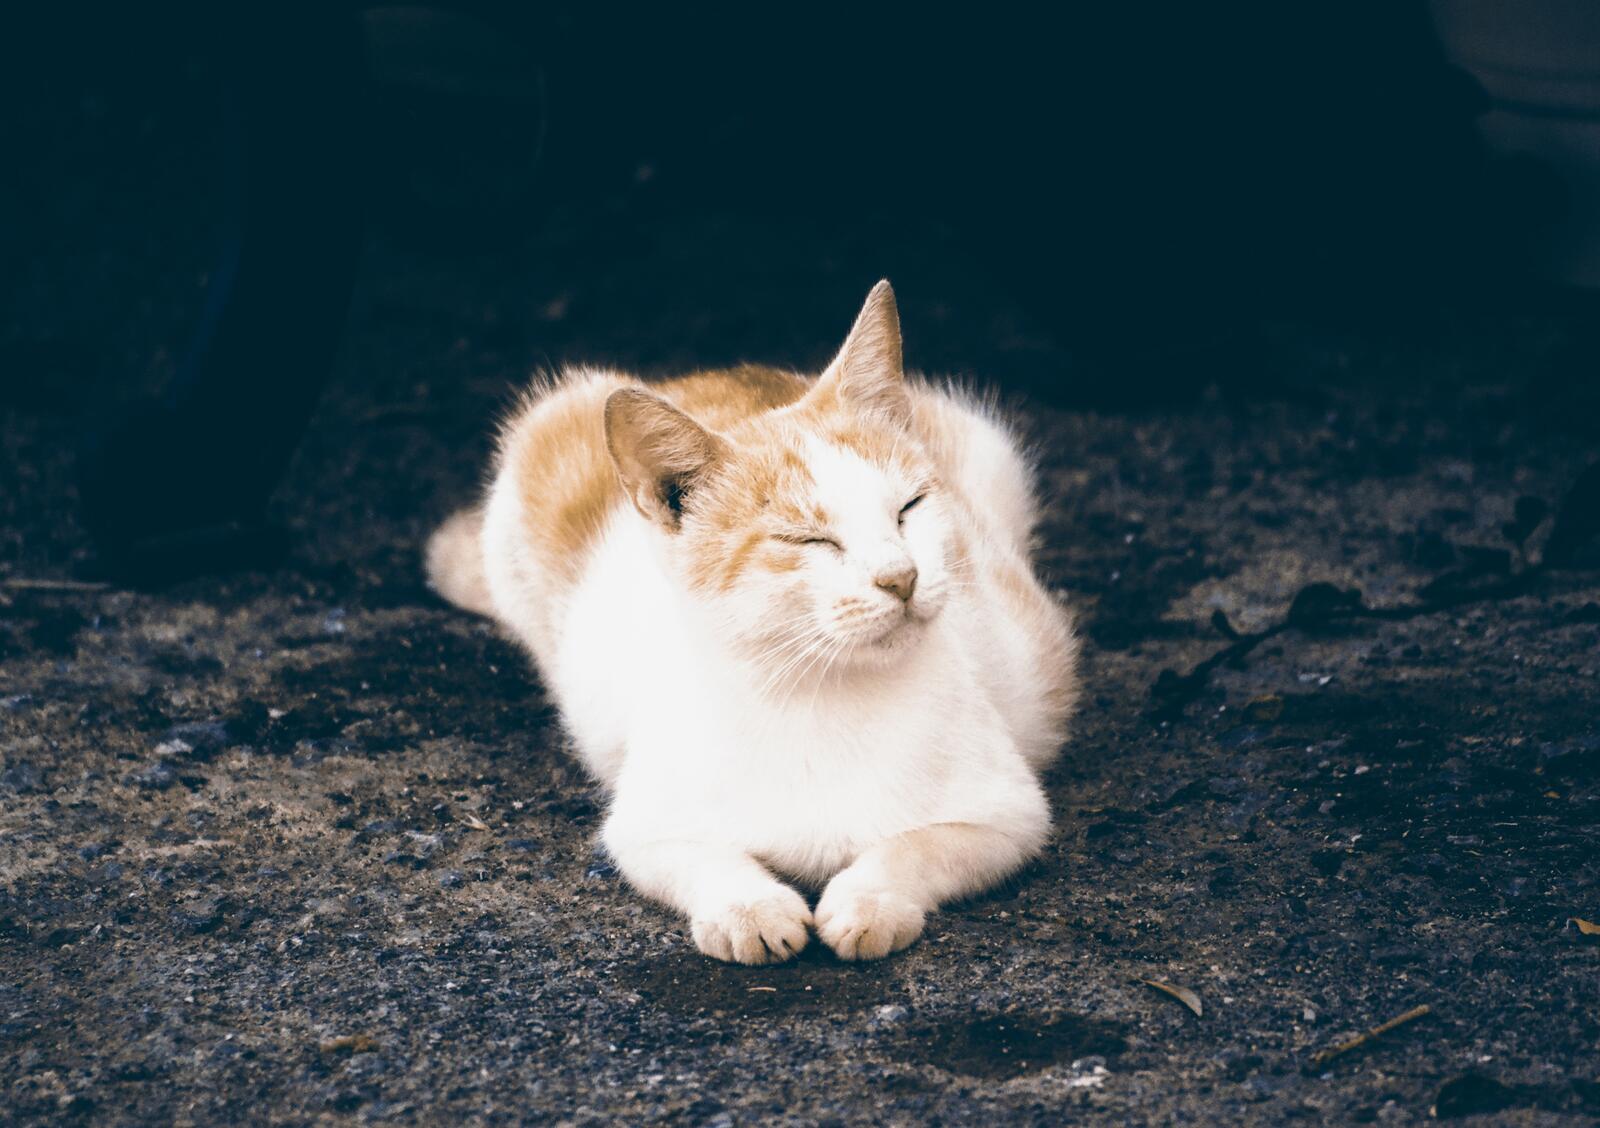 Free photo A sleepy cat resting on the ground